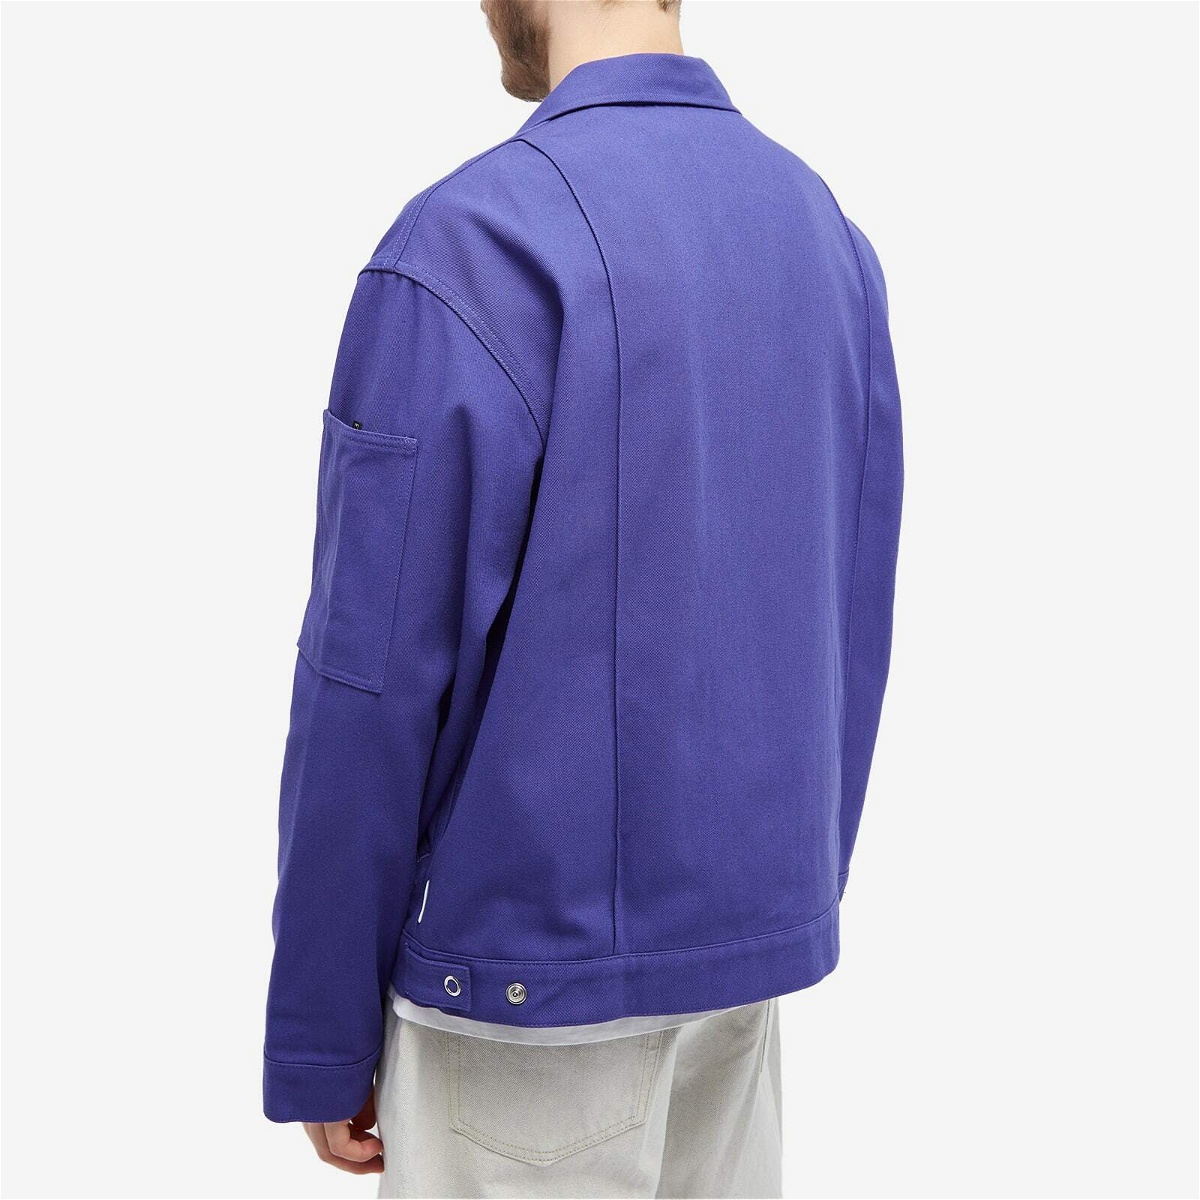 Acne Studios Men's Ourle Twill Overshirt in Electric Purple Acne Studios